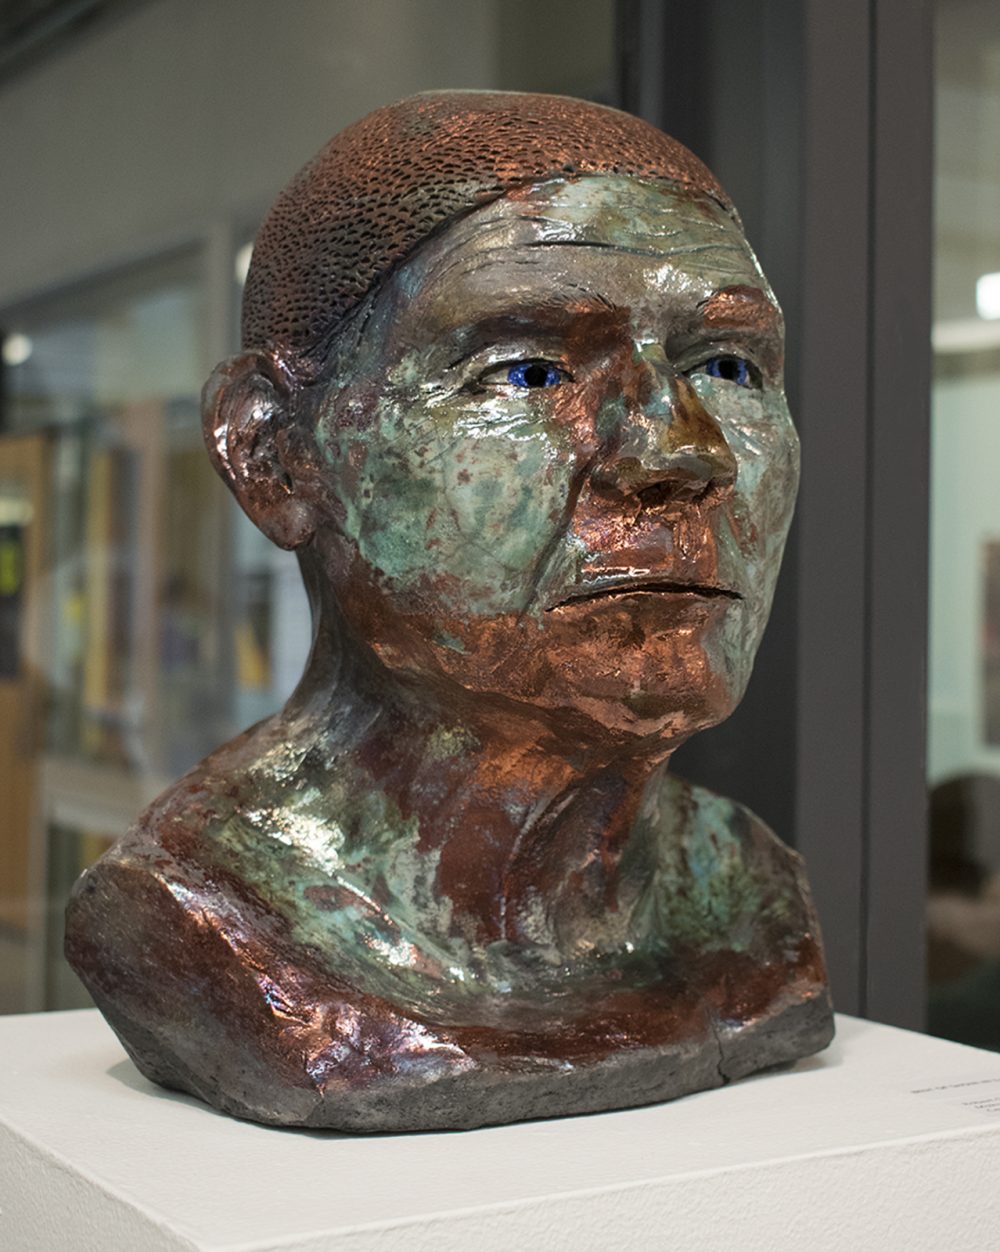 Ceramic sculpture of a bust of a head and shoulders, colored copper and green, sitting on a pedestal in front of an interior glass wall.